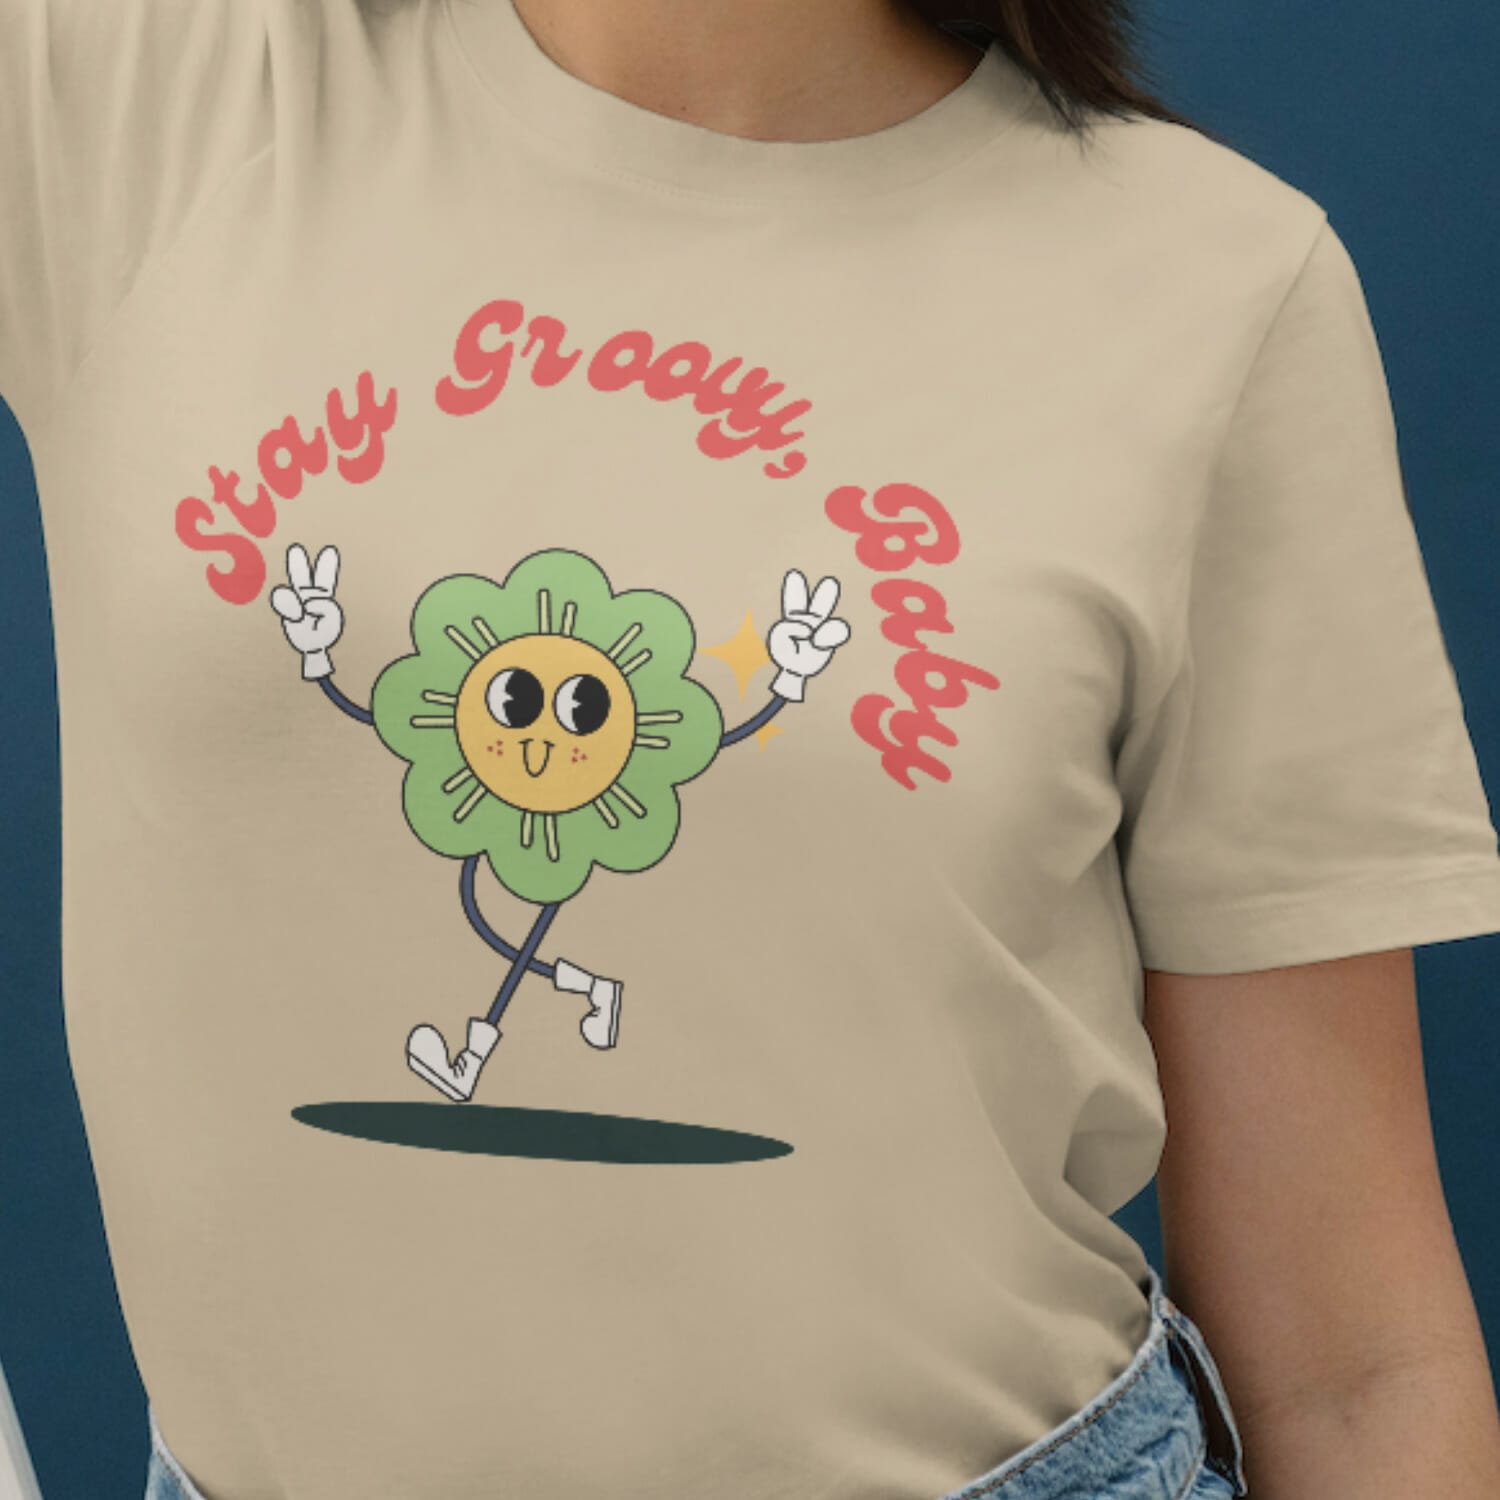 Stay groovy baby T-shirt Design